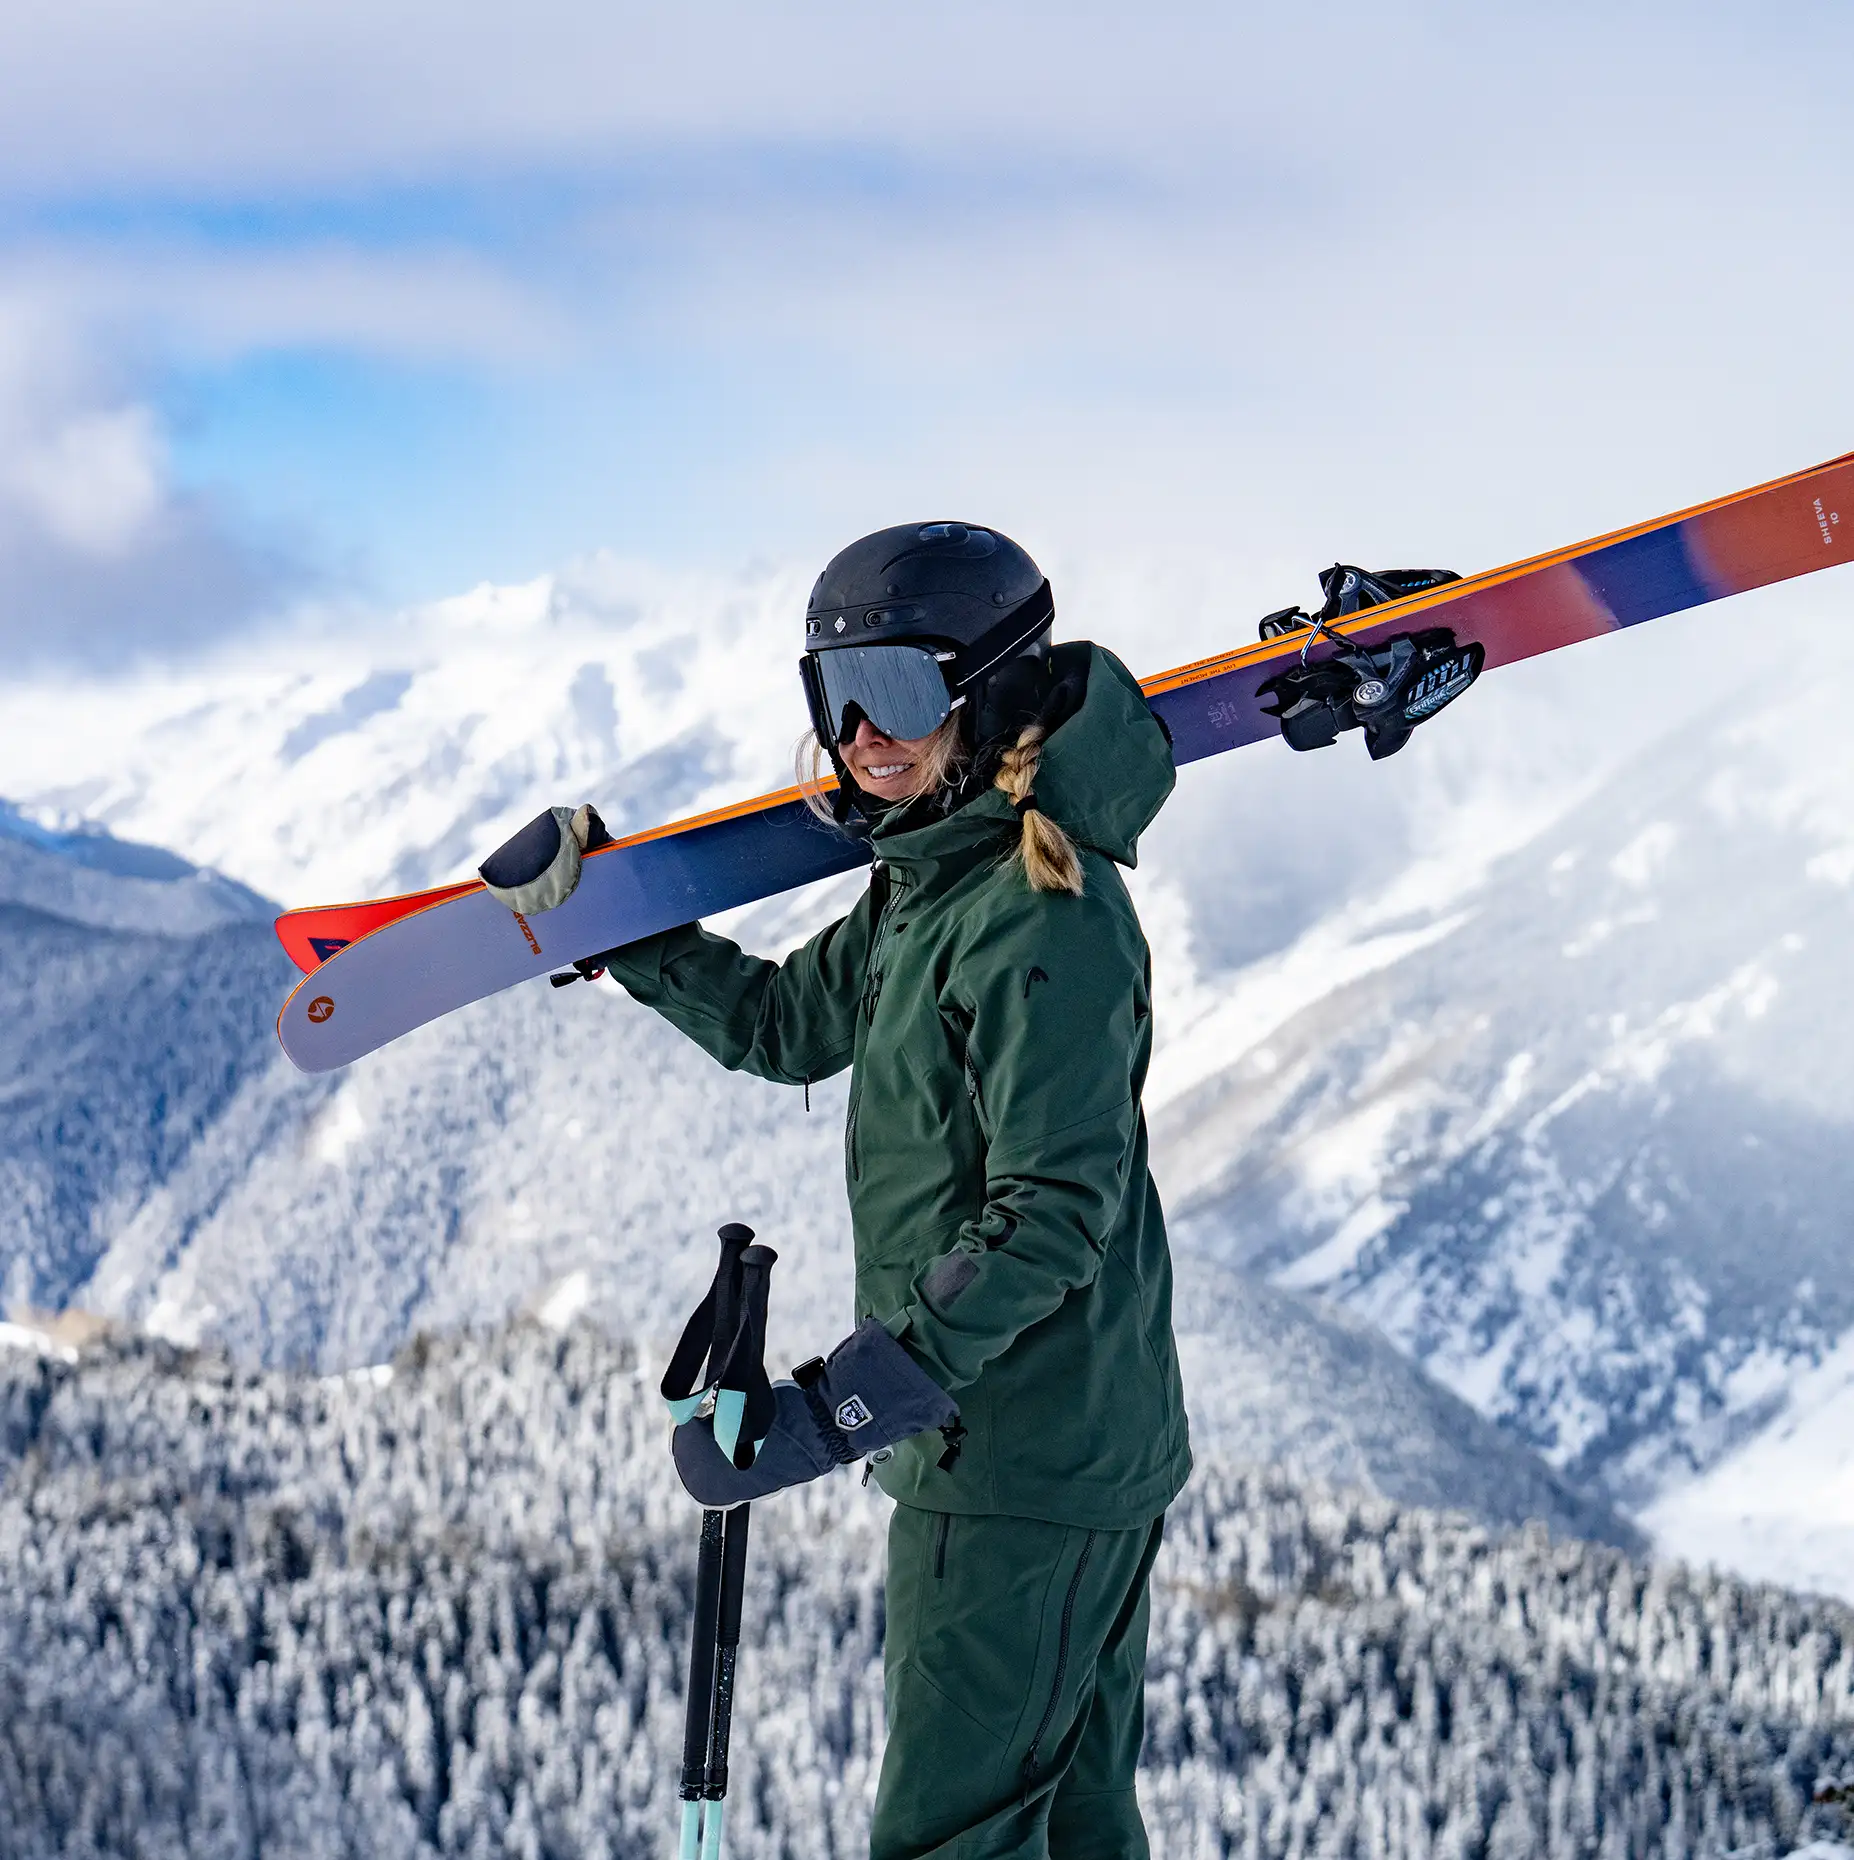 5 Reasons to Buy Travel Insurance For Your Ski Trip